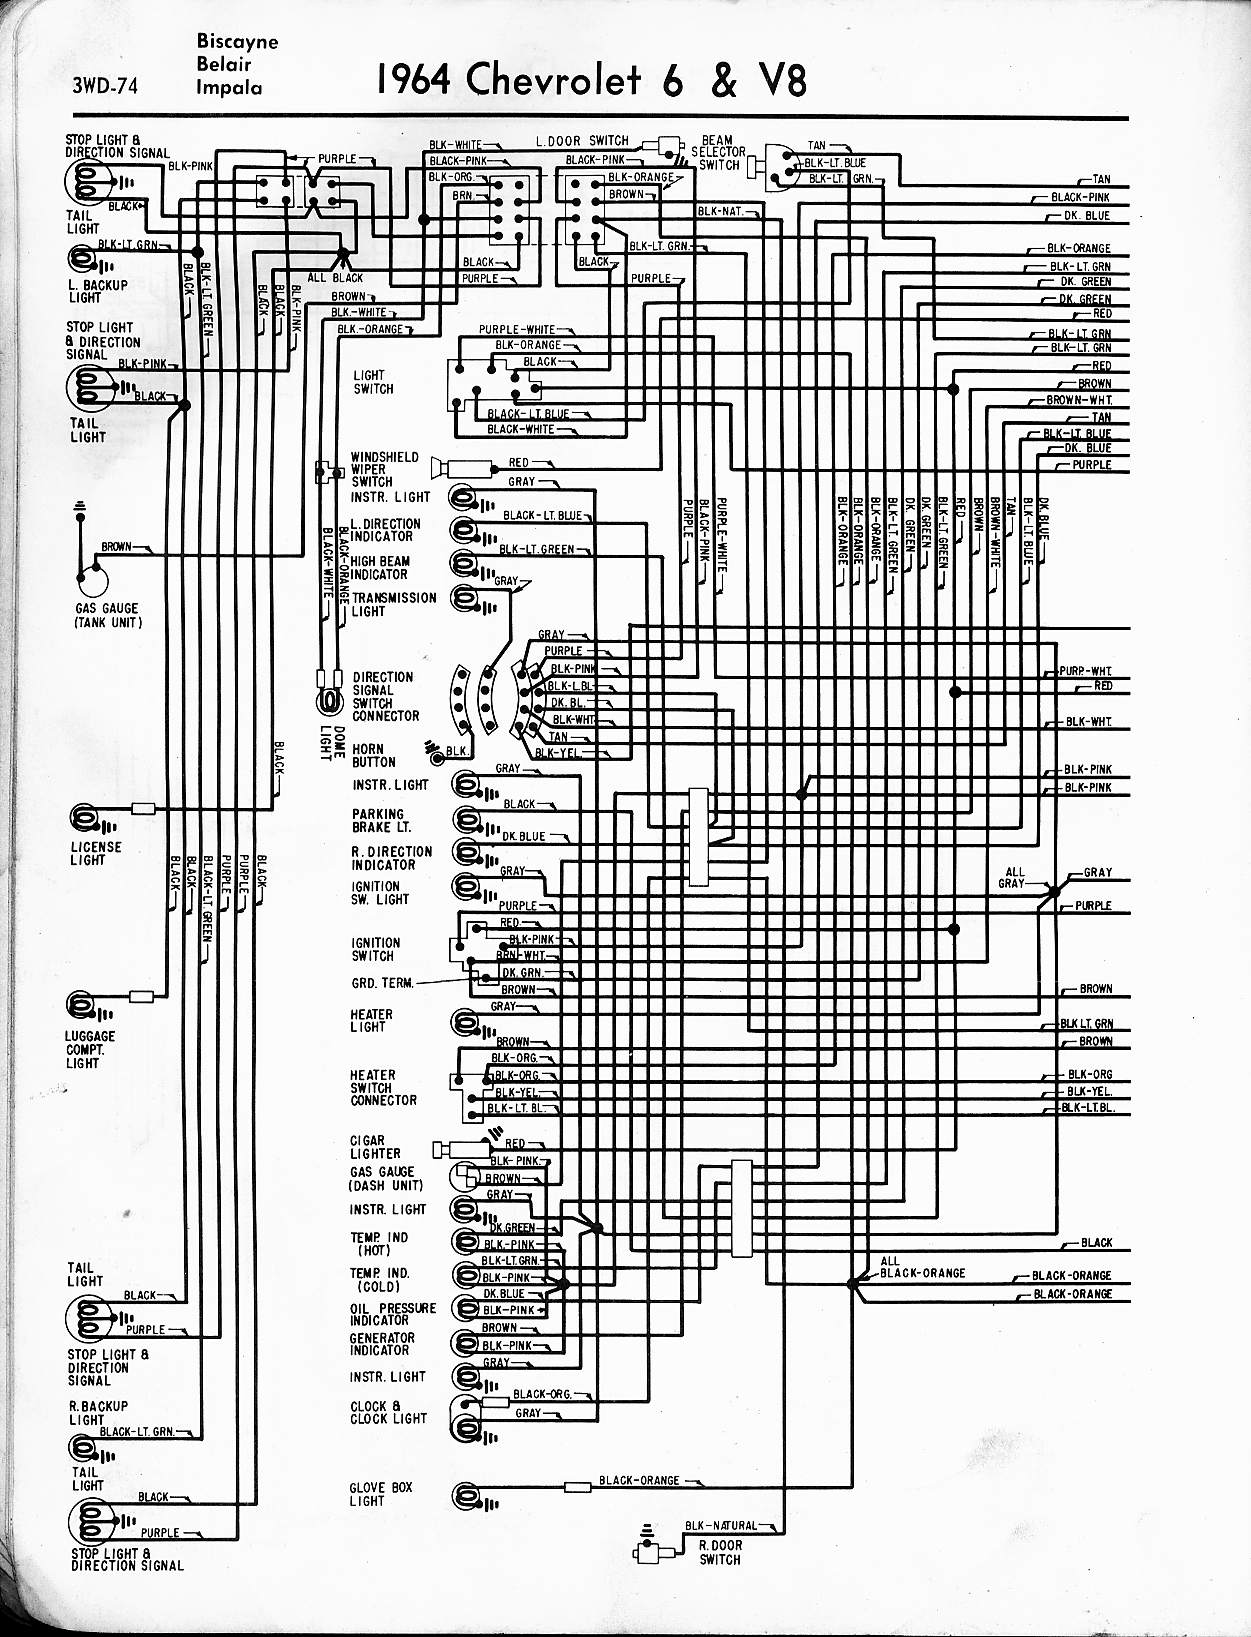 2002 Impala Ignition Switch Wiring Diagram from www.oldcarmanualproject.com